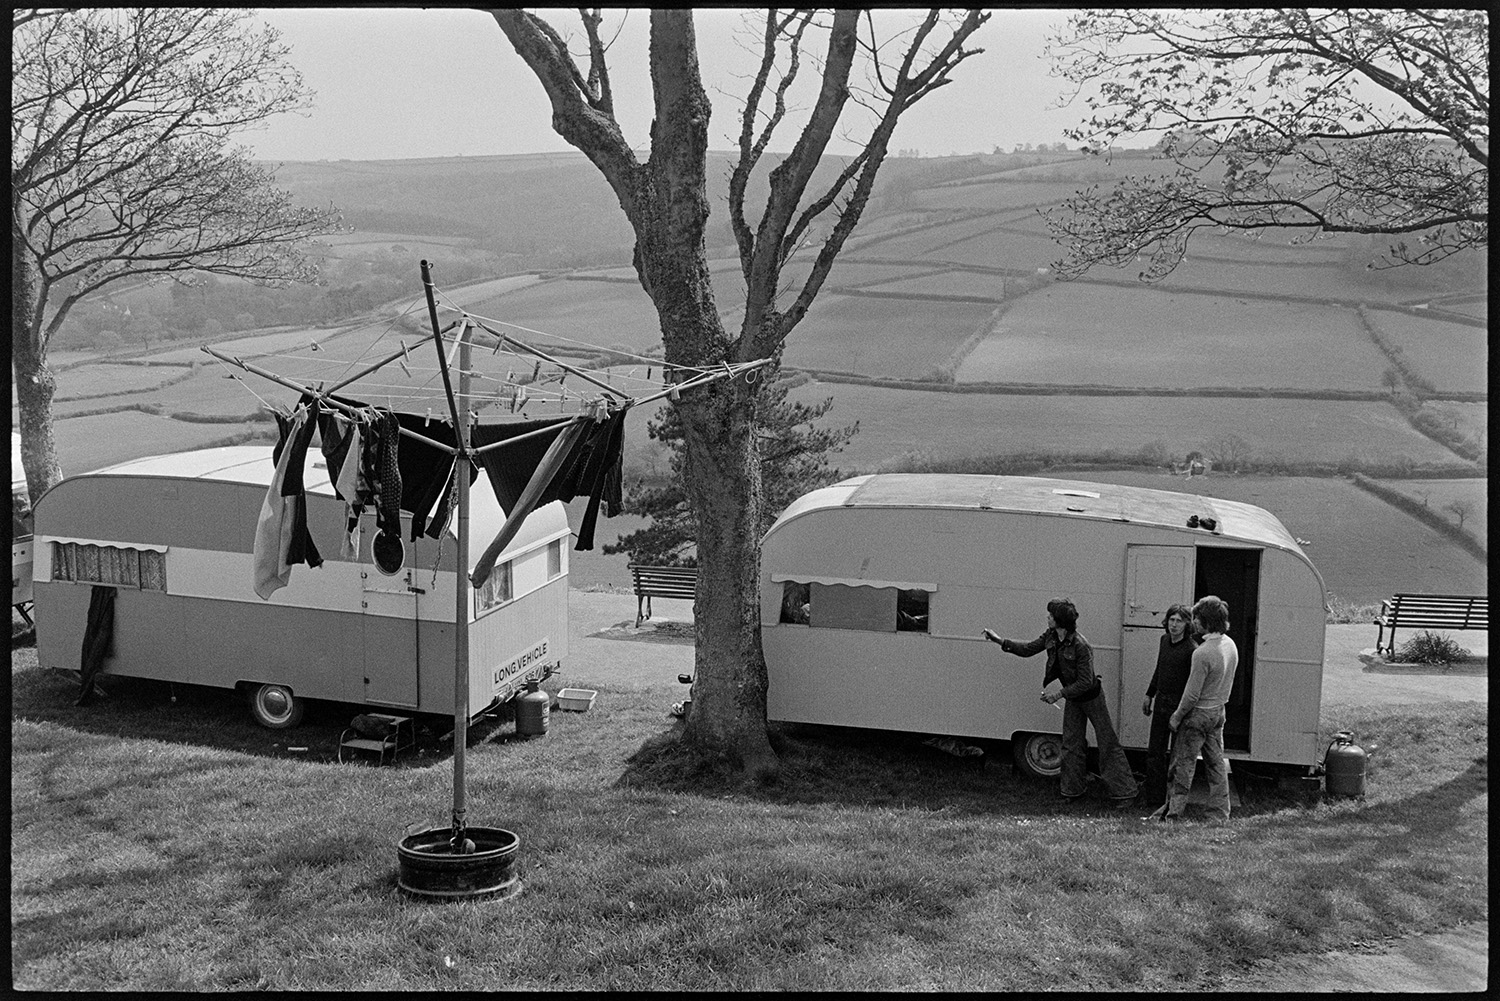 Two caravans with washing on clothes dryer, part of fair. 
[People outside two caravans which had come to Torrington Mayfair. They are parked in a park, possibly Castle Park, overlooking fields and hedges. Clothes are hung up to dry on a washing line in the foreground.]